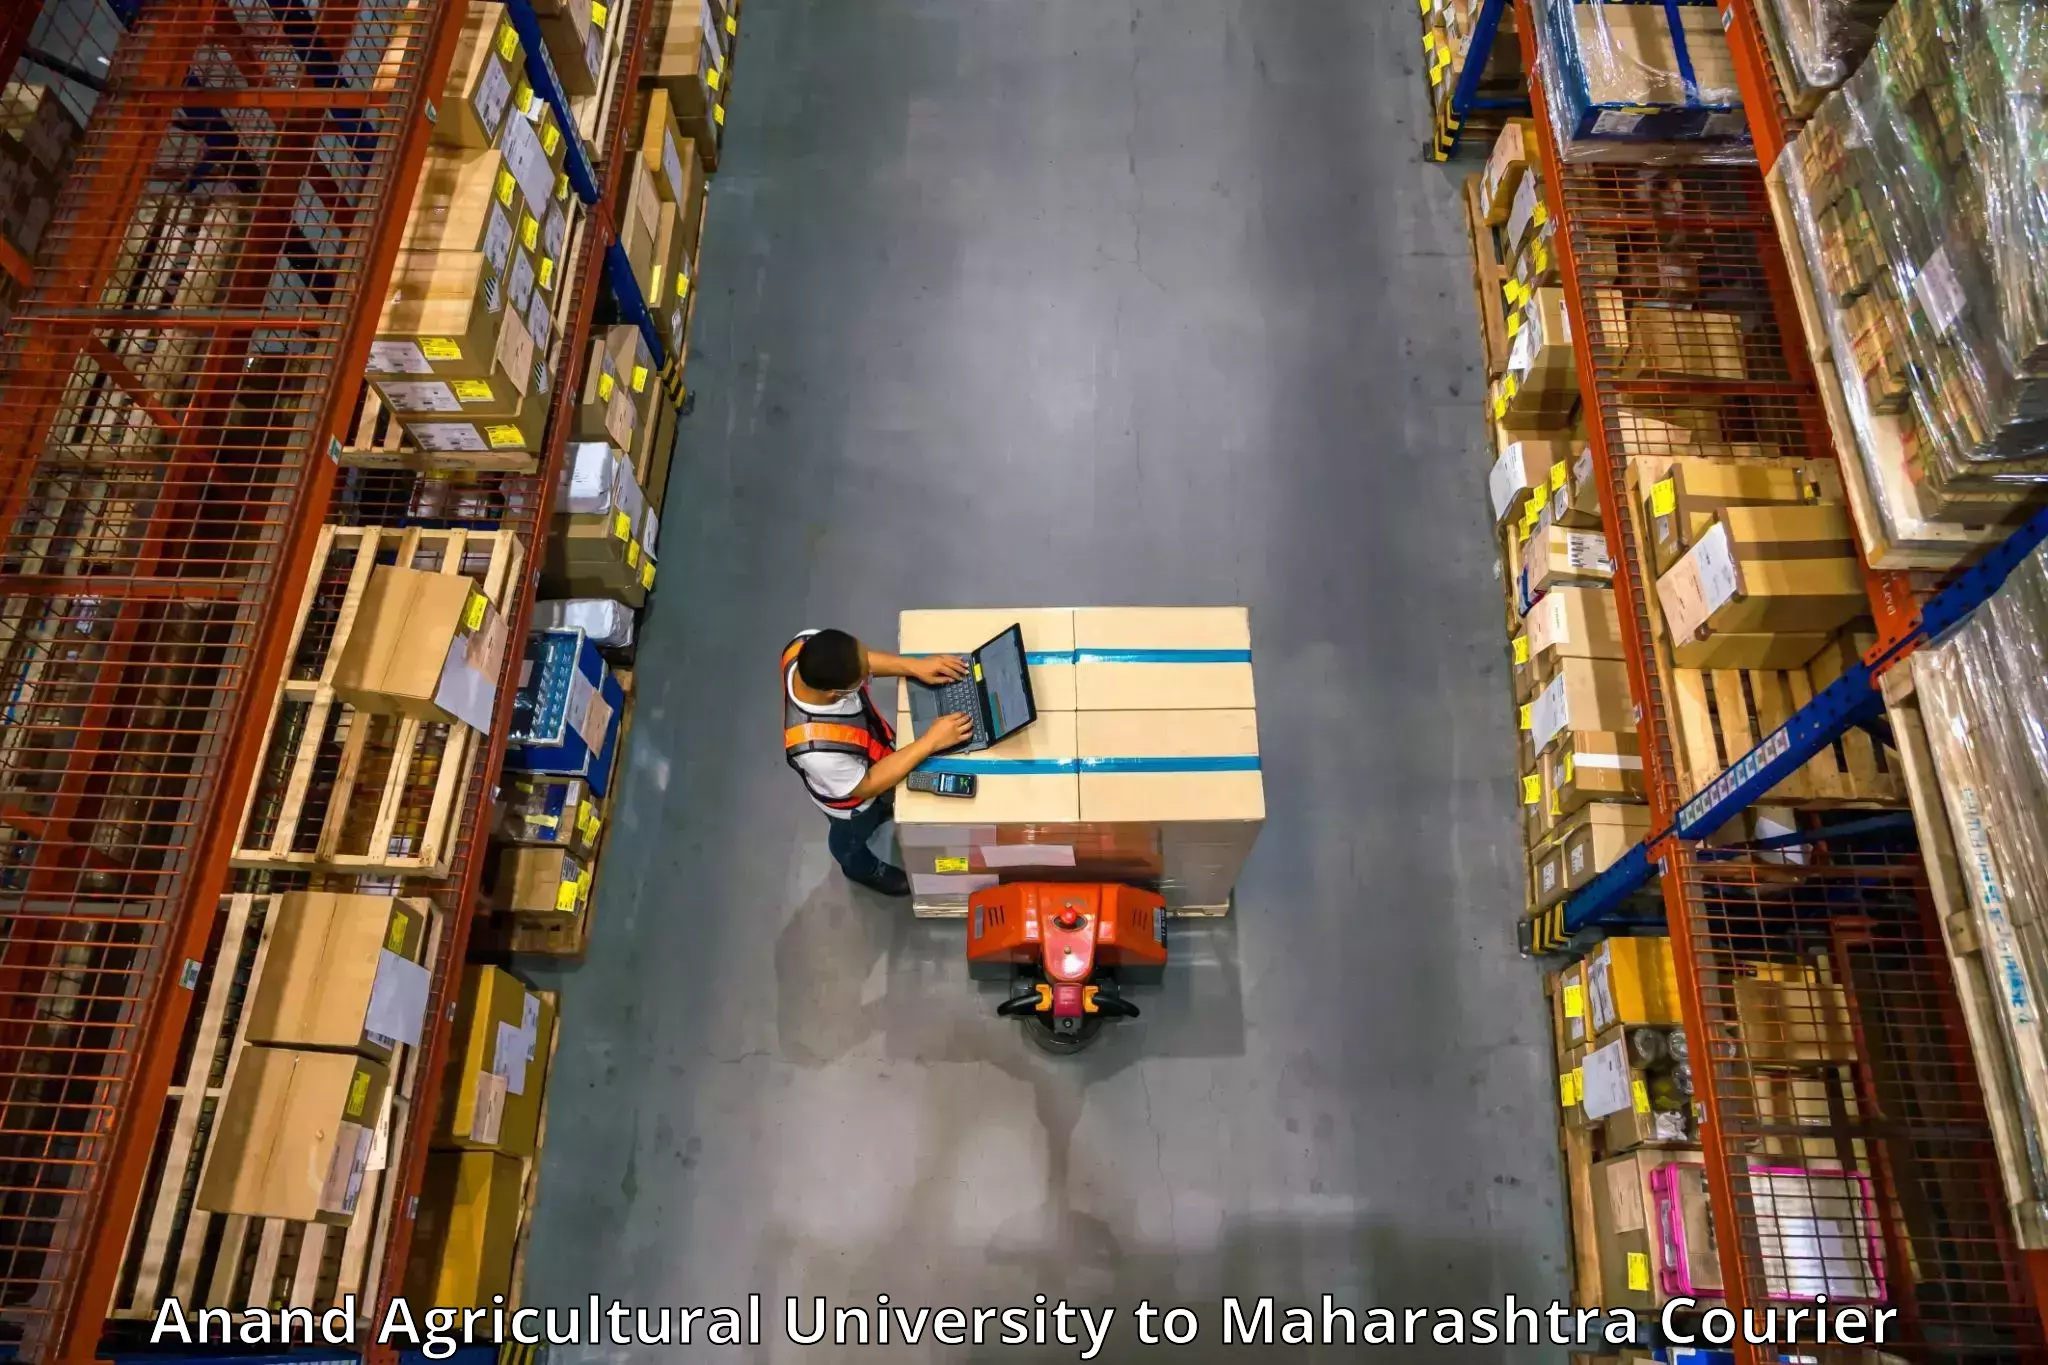 Skilled furniture transporters Anand Agricultural University to Karmala